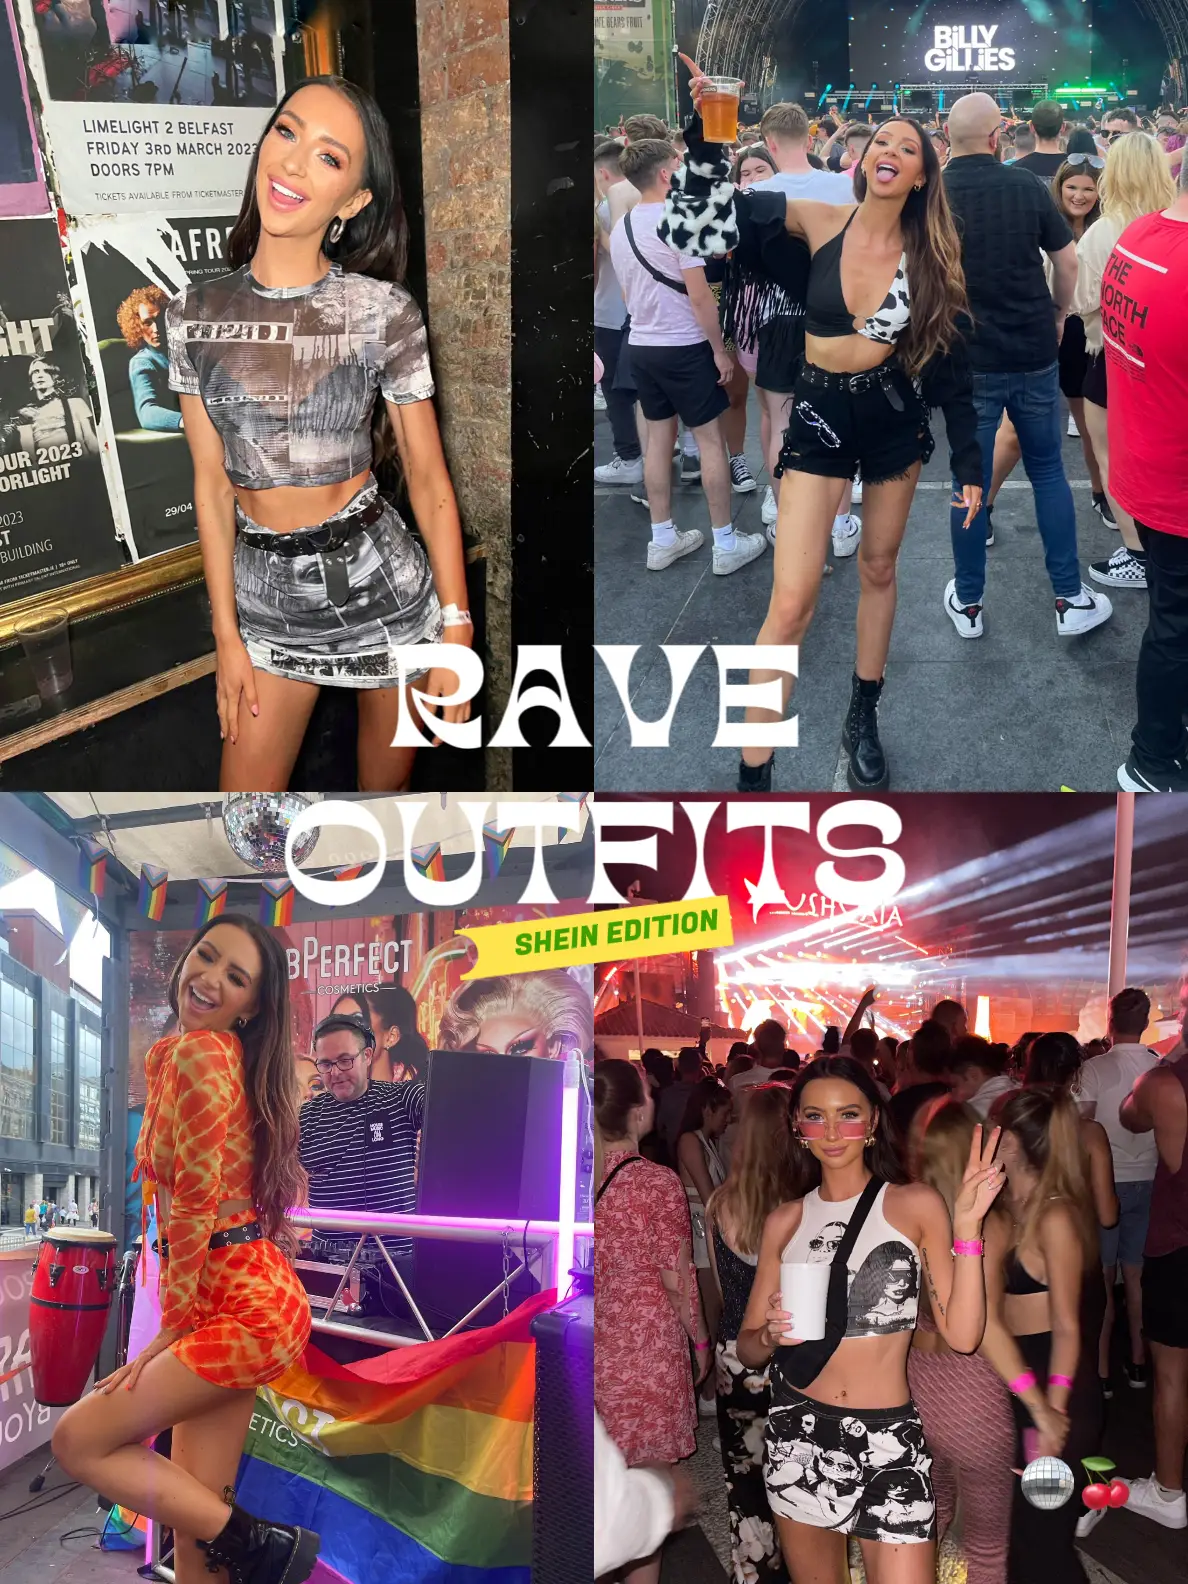 Bass Baddie - Rave Top - Rave Bae Couture